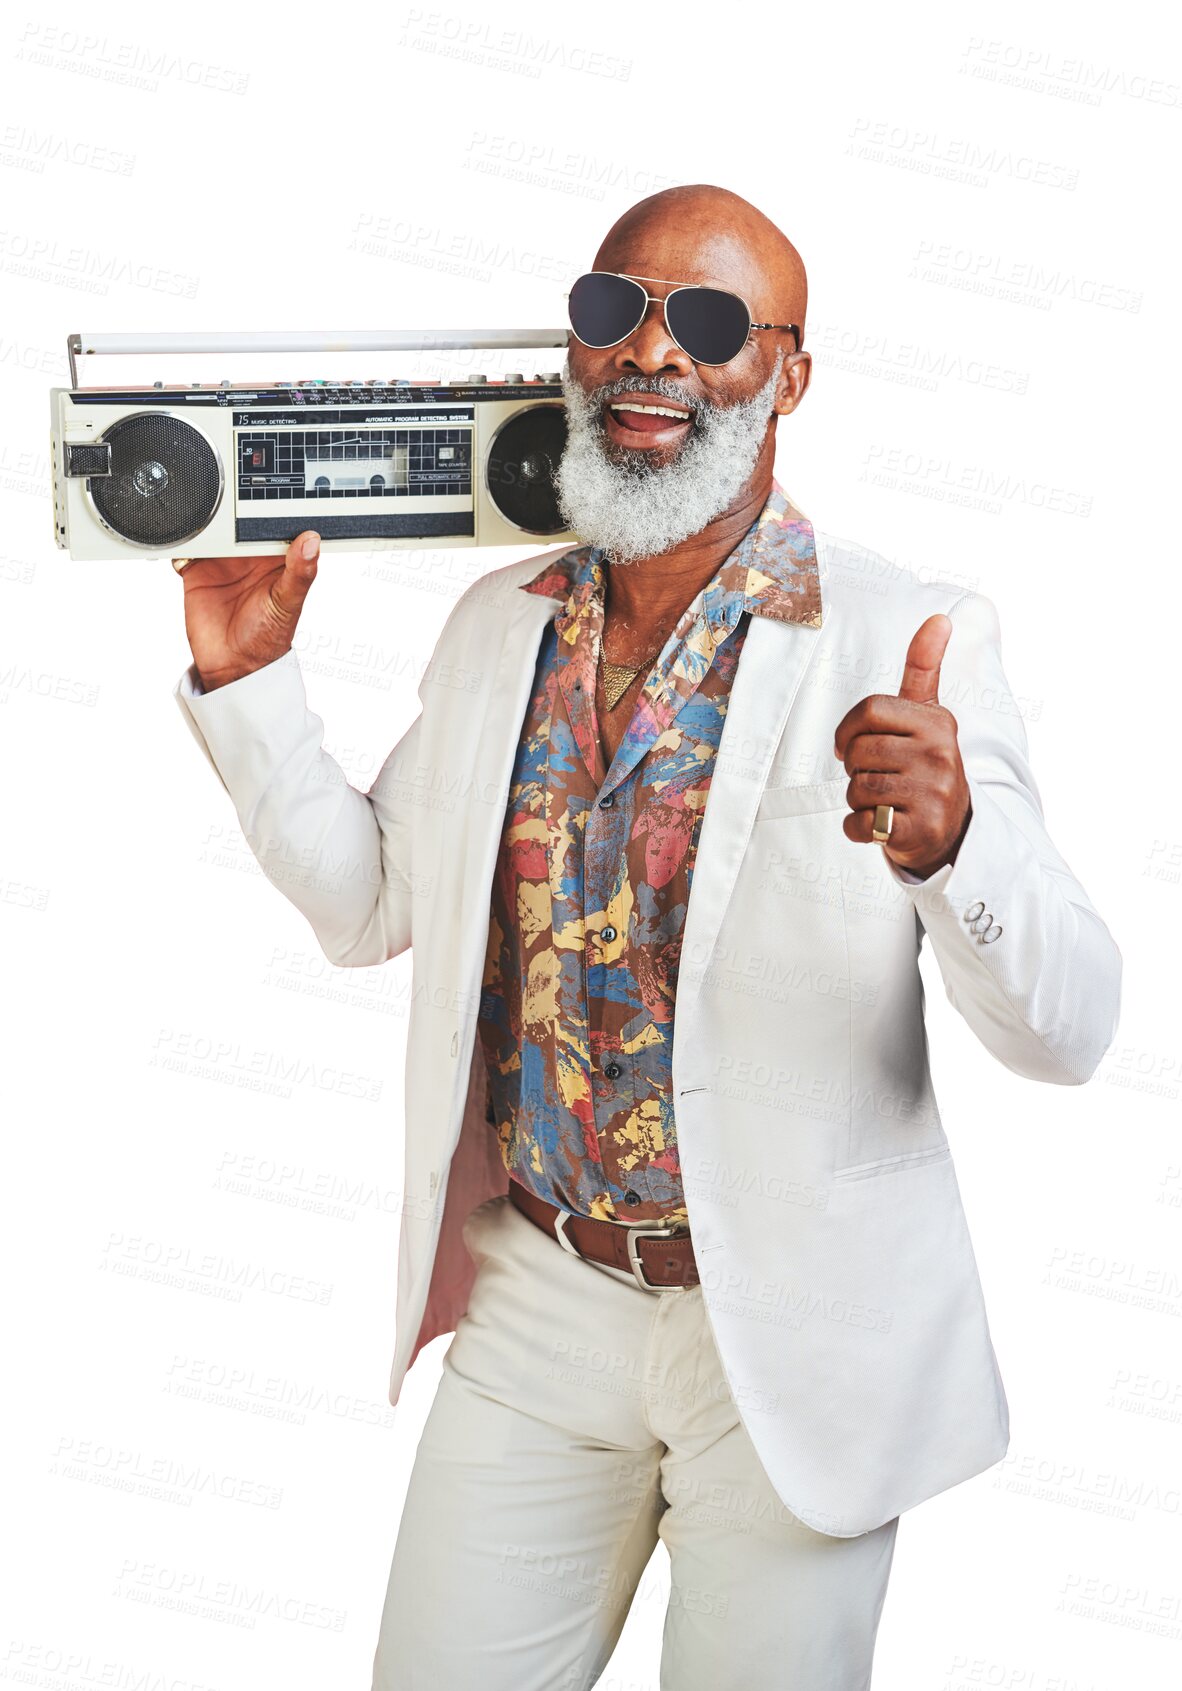 Buy stock photo Portrait, thumbs up and music with a senior black man isolated on transparent background for support. Radio, thank you or success with an elderly person listening to audio sound on PNG for motivation